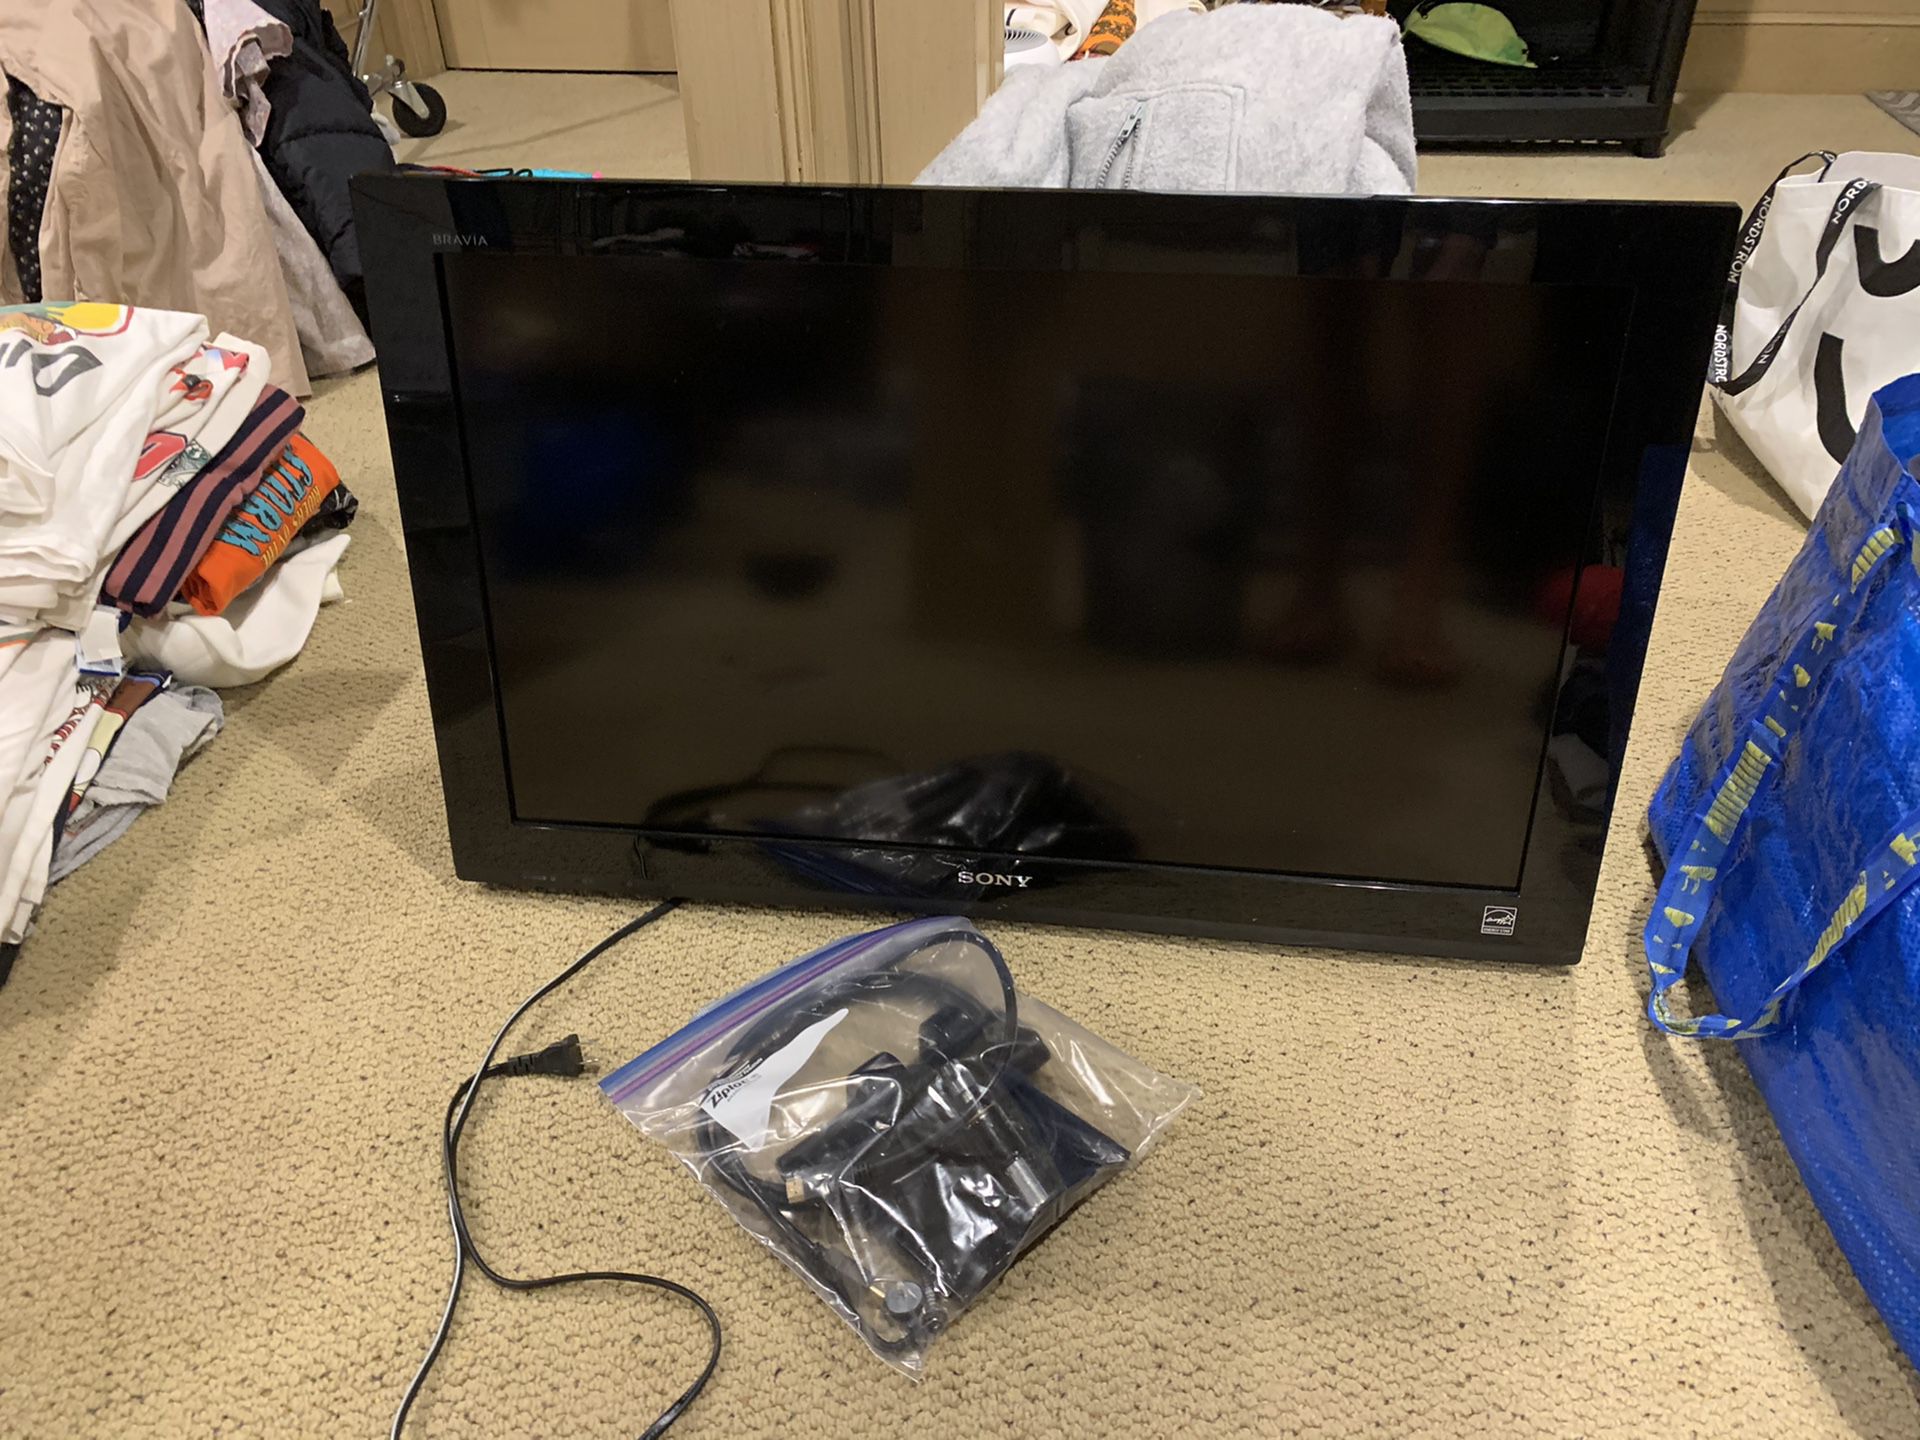 32” Bravia Sony TV with wall mount